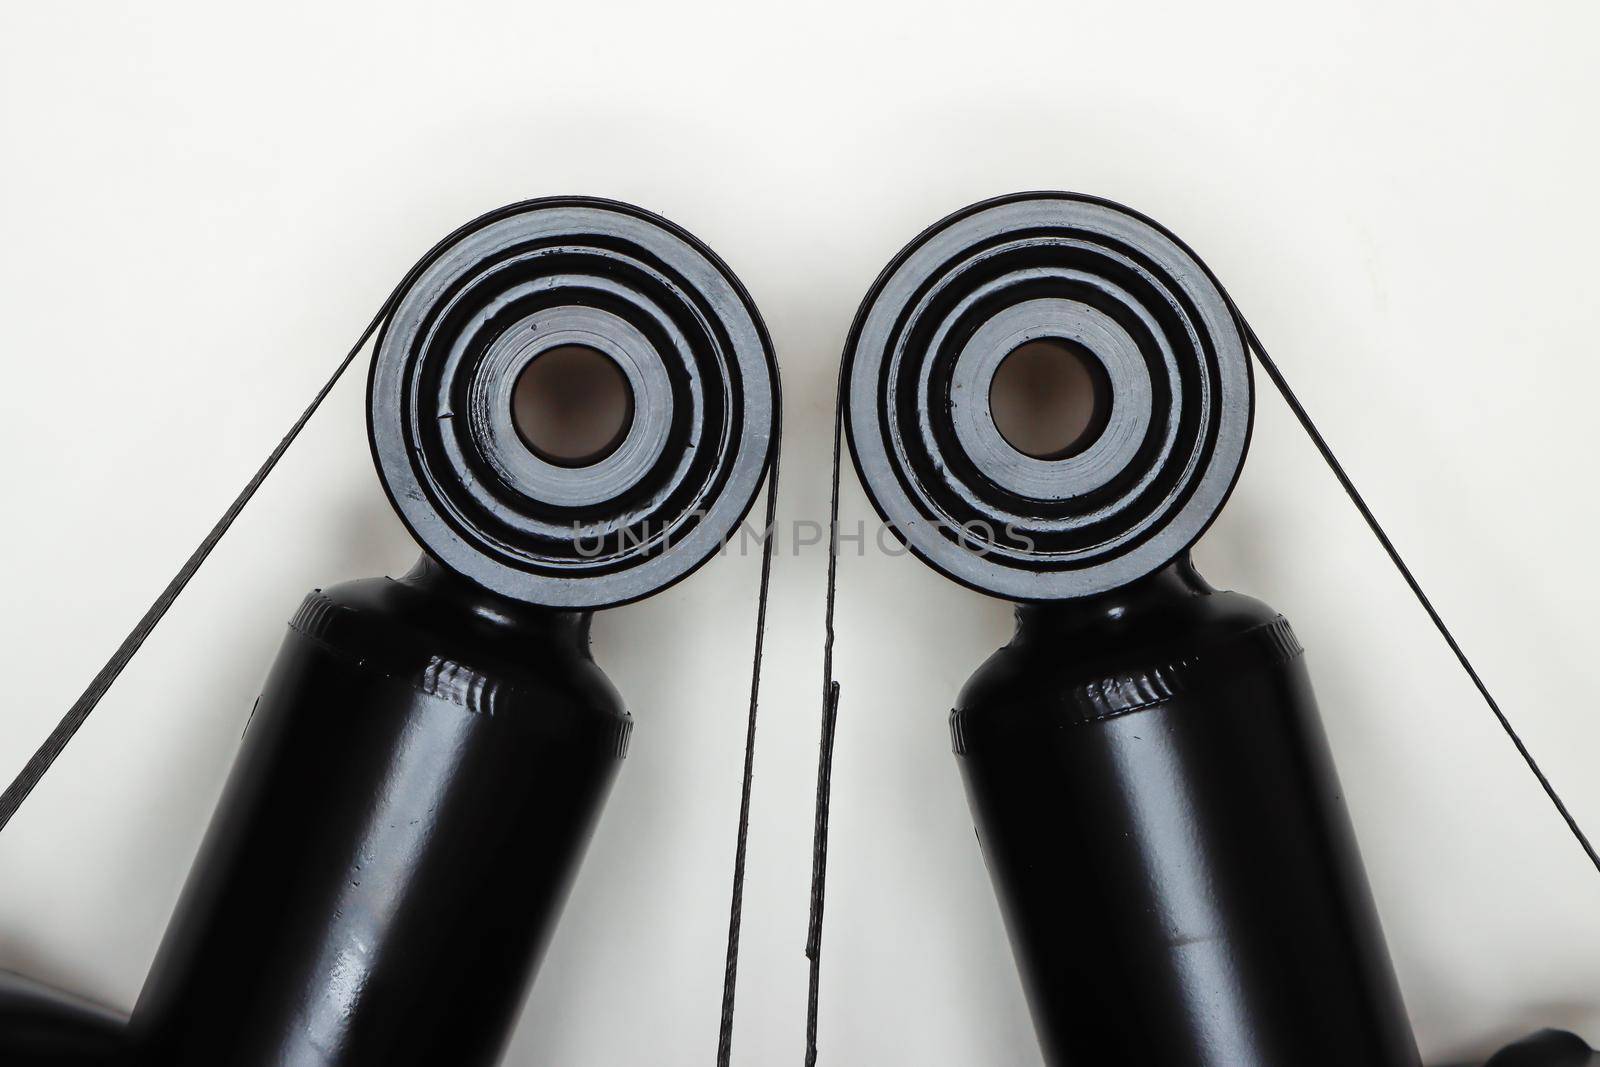 Two silent blocks on shock absorbers, parts for car repair. A set of spare parts for servicing the chassis of the vehicle. Details on white background, copy space available.